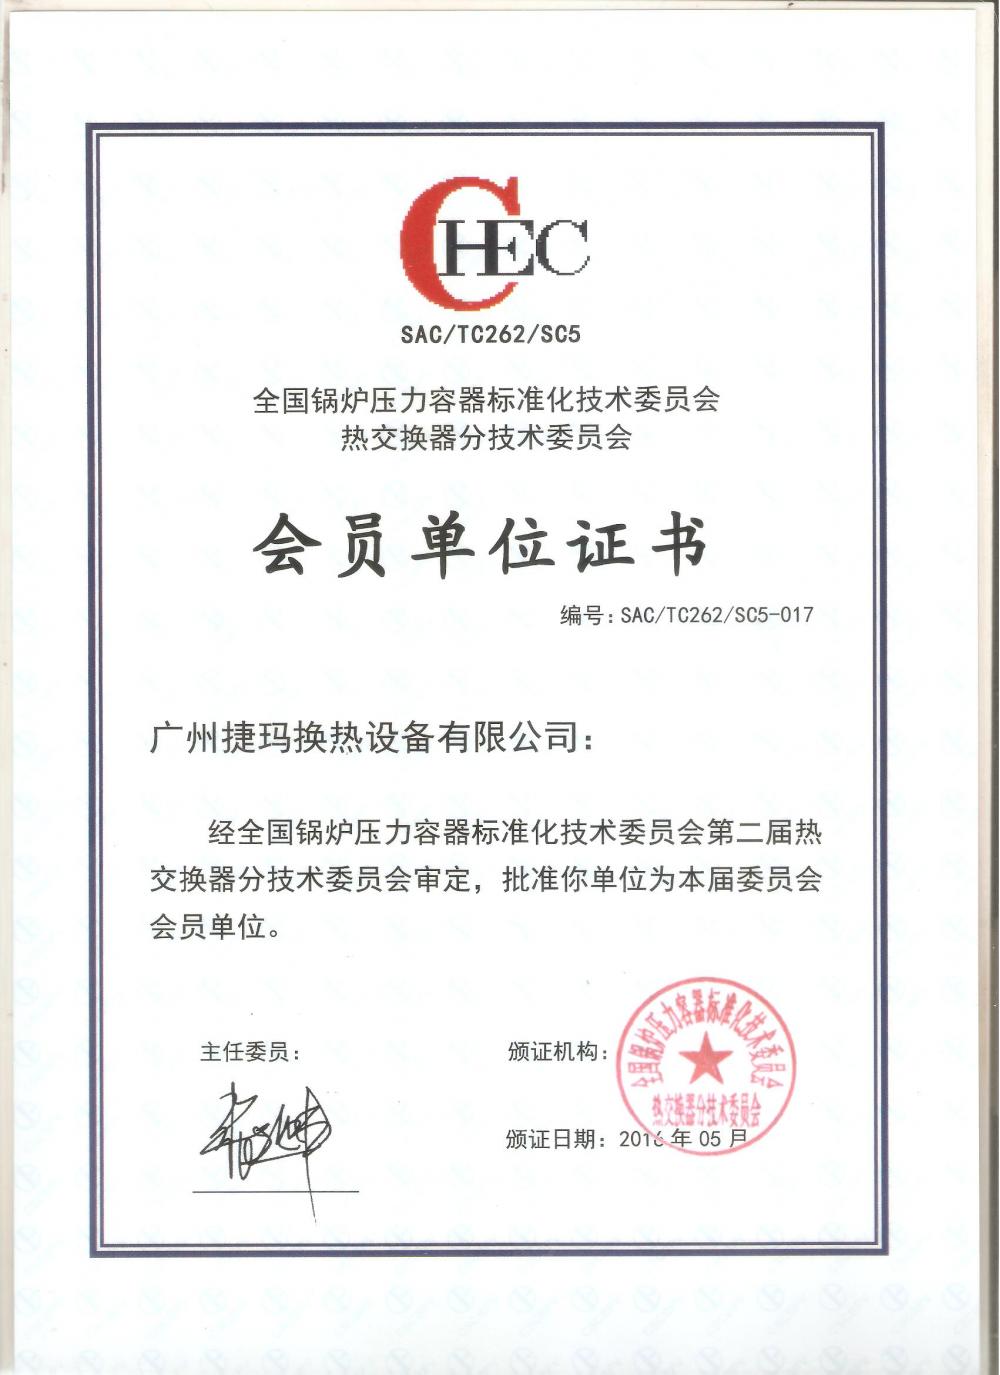 Member of National Technical Committee of Standardization of Boiler And Pressure Vessel